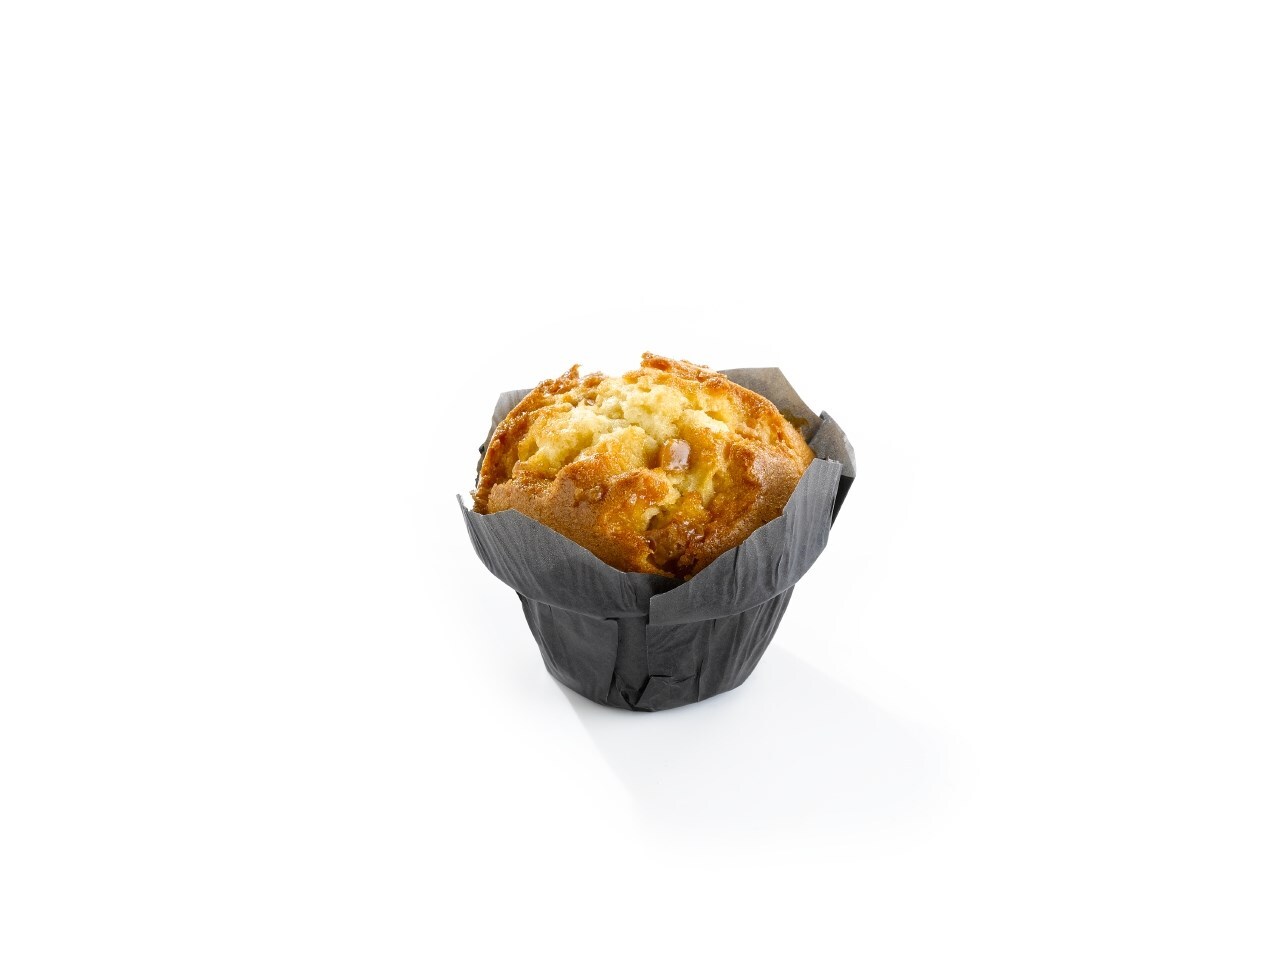 61622 Roomboter muffin banana toffee 24x125 gr